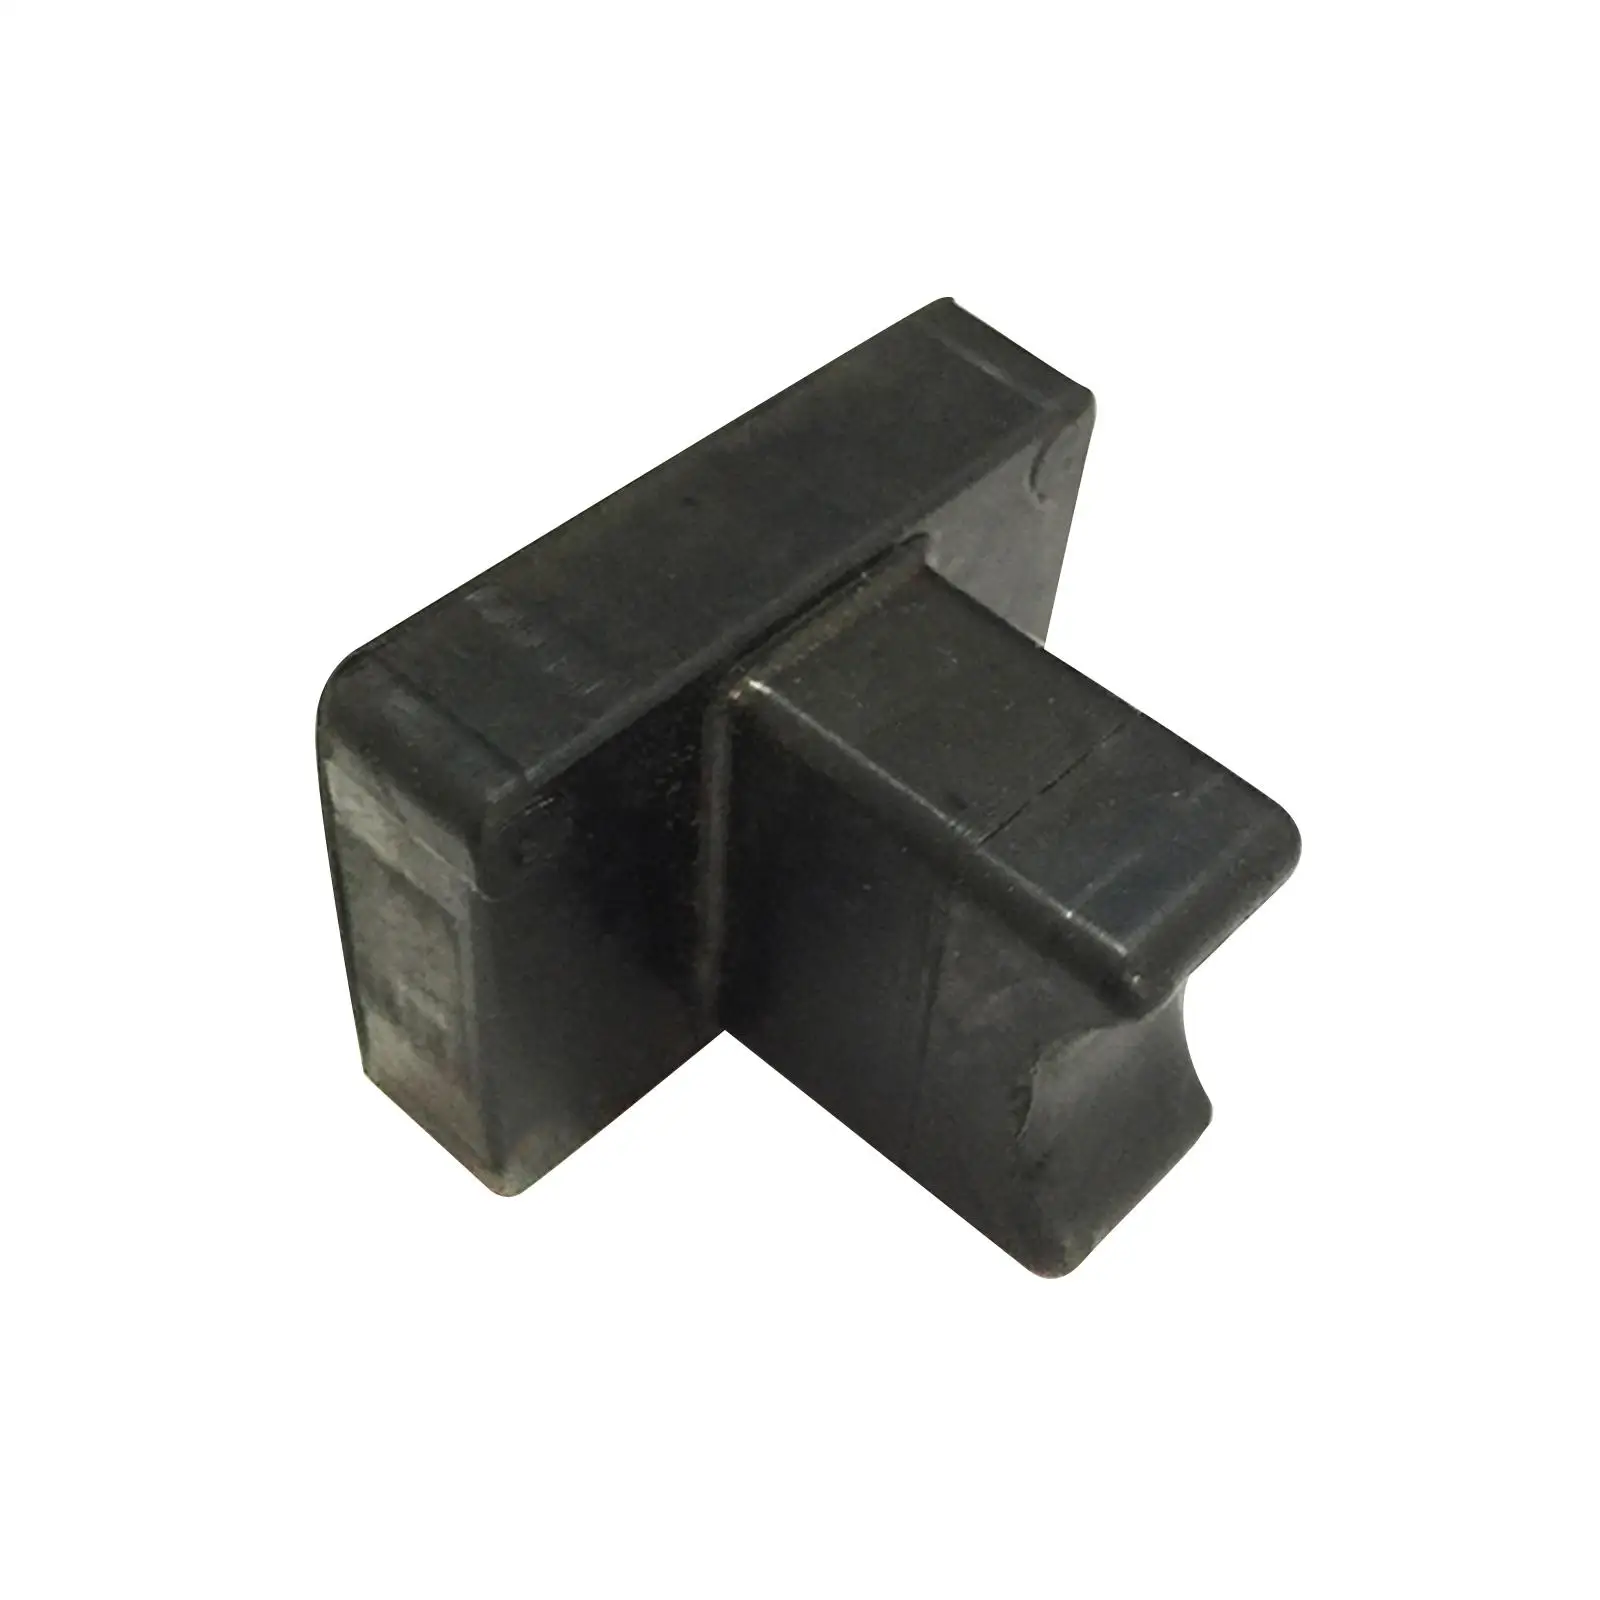 Rubber Mat 3B2-61336-0-00 Assembly Accessory Easy Installation 3B2-61336-0-00 Mount Rubber Lower for Nissan Outboard Engine